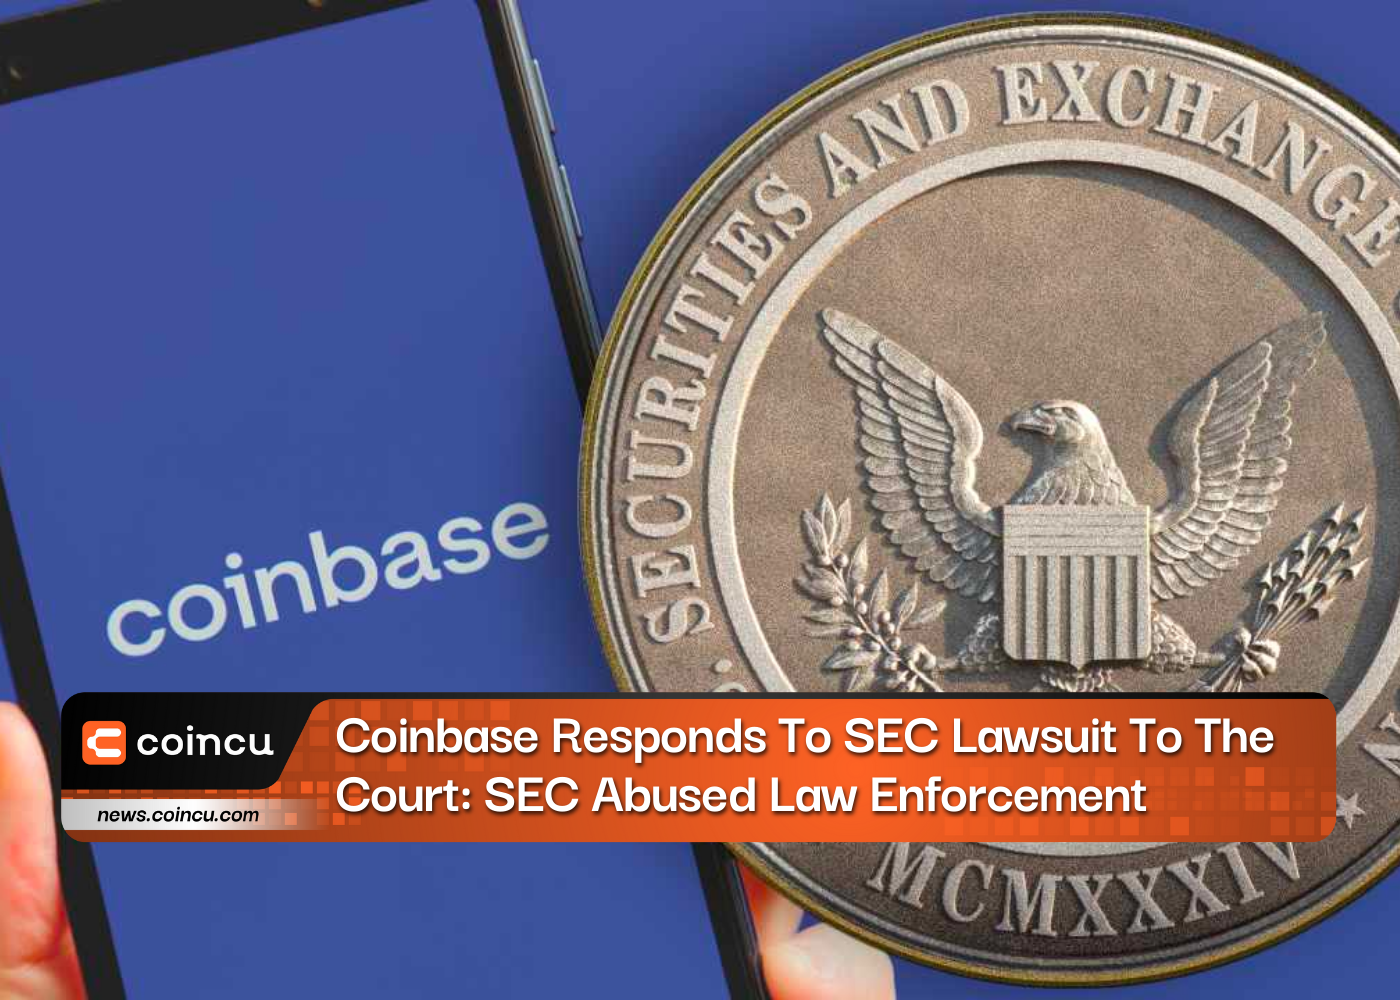 Coinbase Responds To SEC Lawsuit To The Court: SEC Abused Law Enforcement